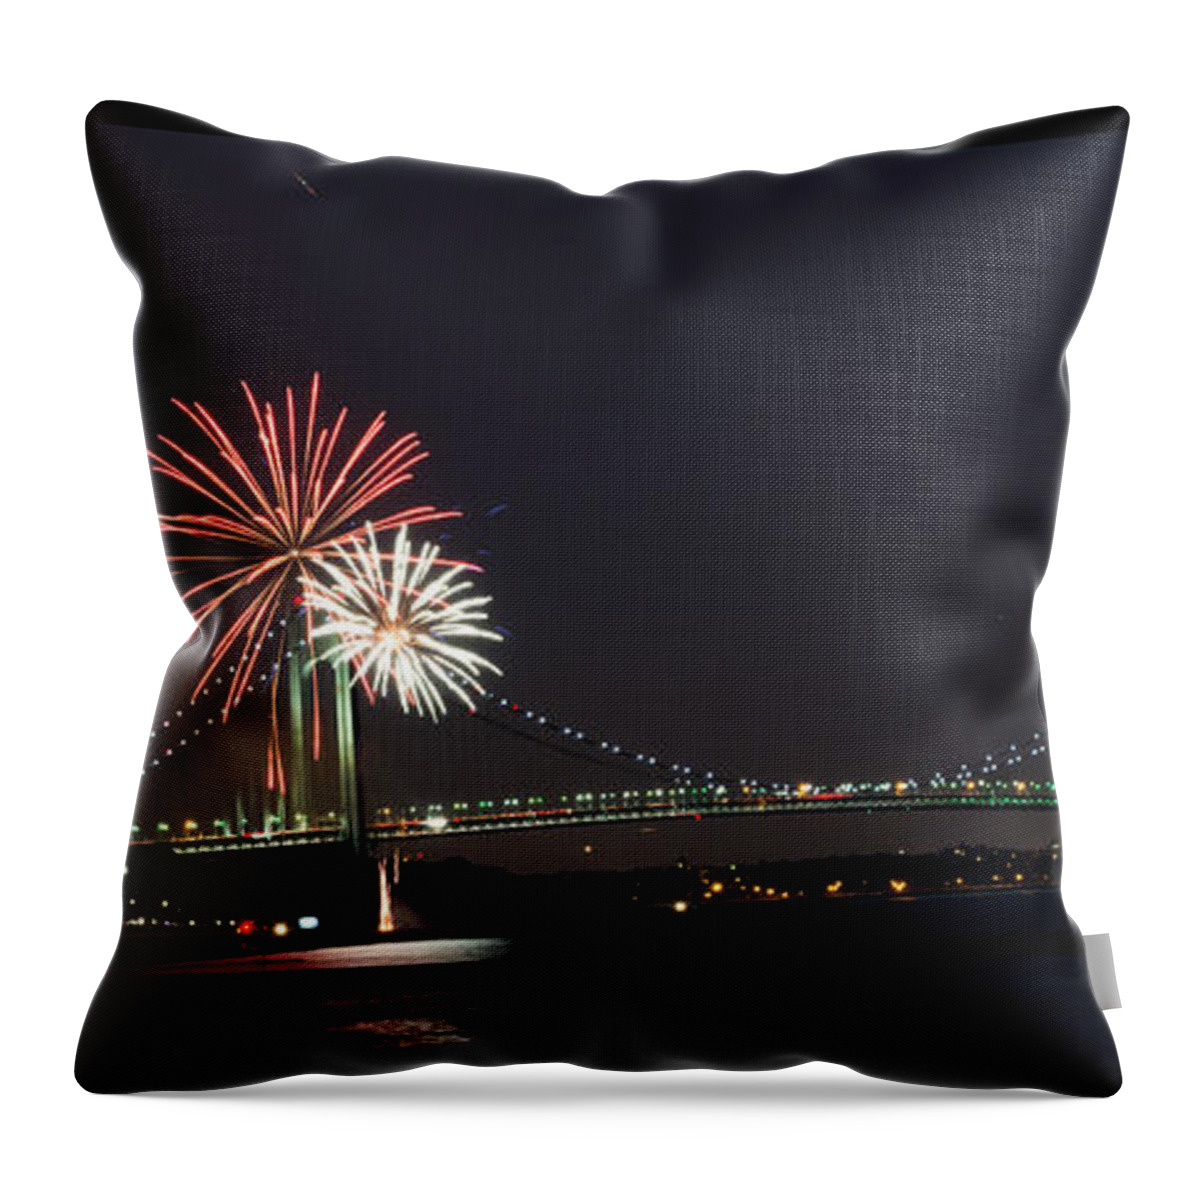 Fireworks Exploding Over The Verrazzano Narrows Bridge Throw Pillow featuring the photograph Fireworks over Verrazano Bridge by Kenneth Cole